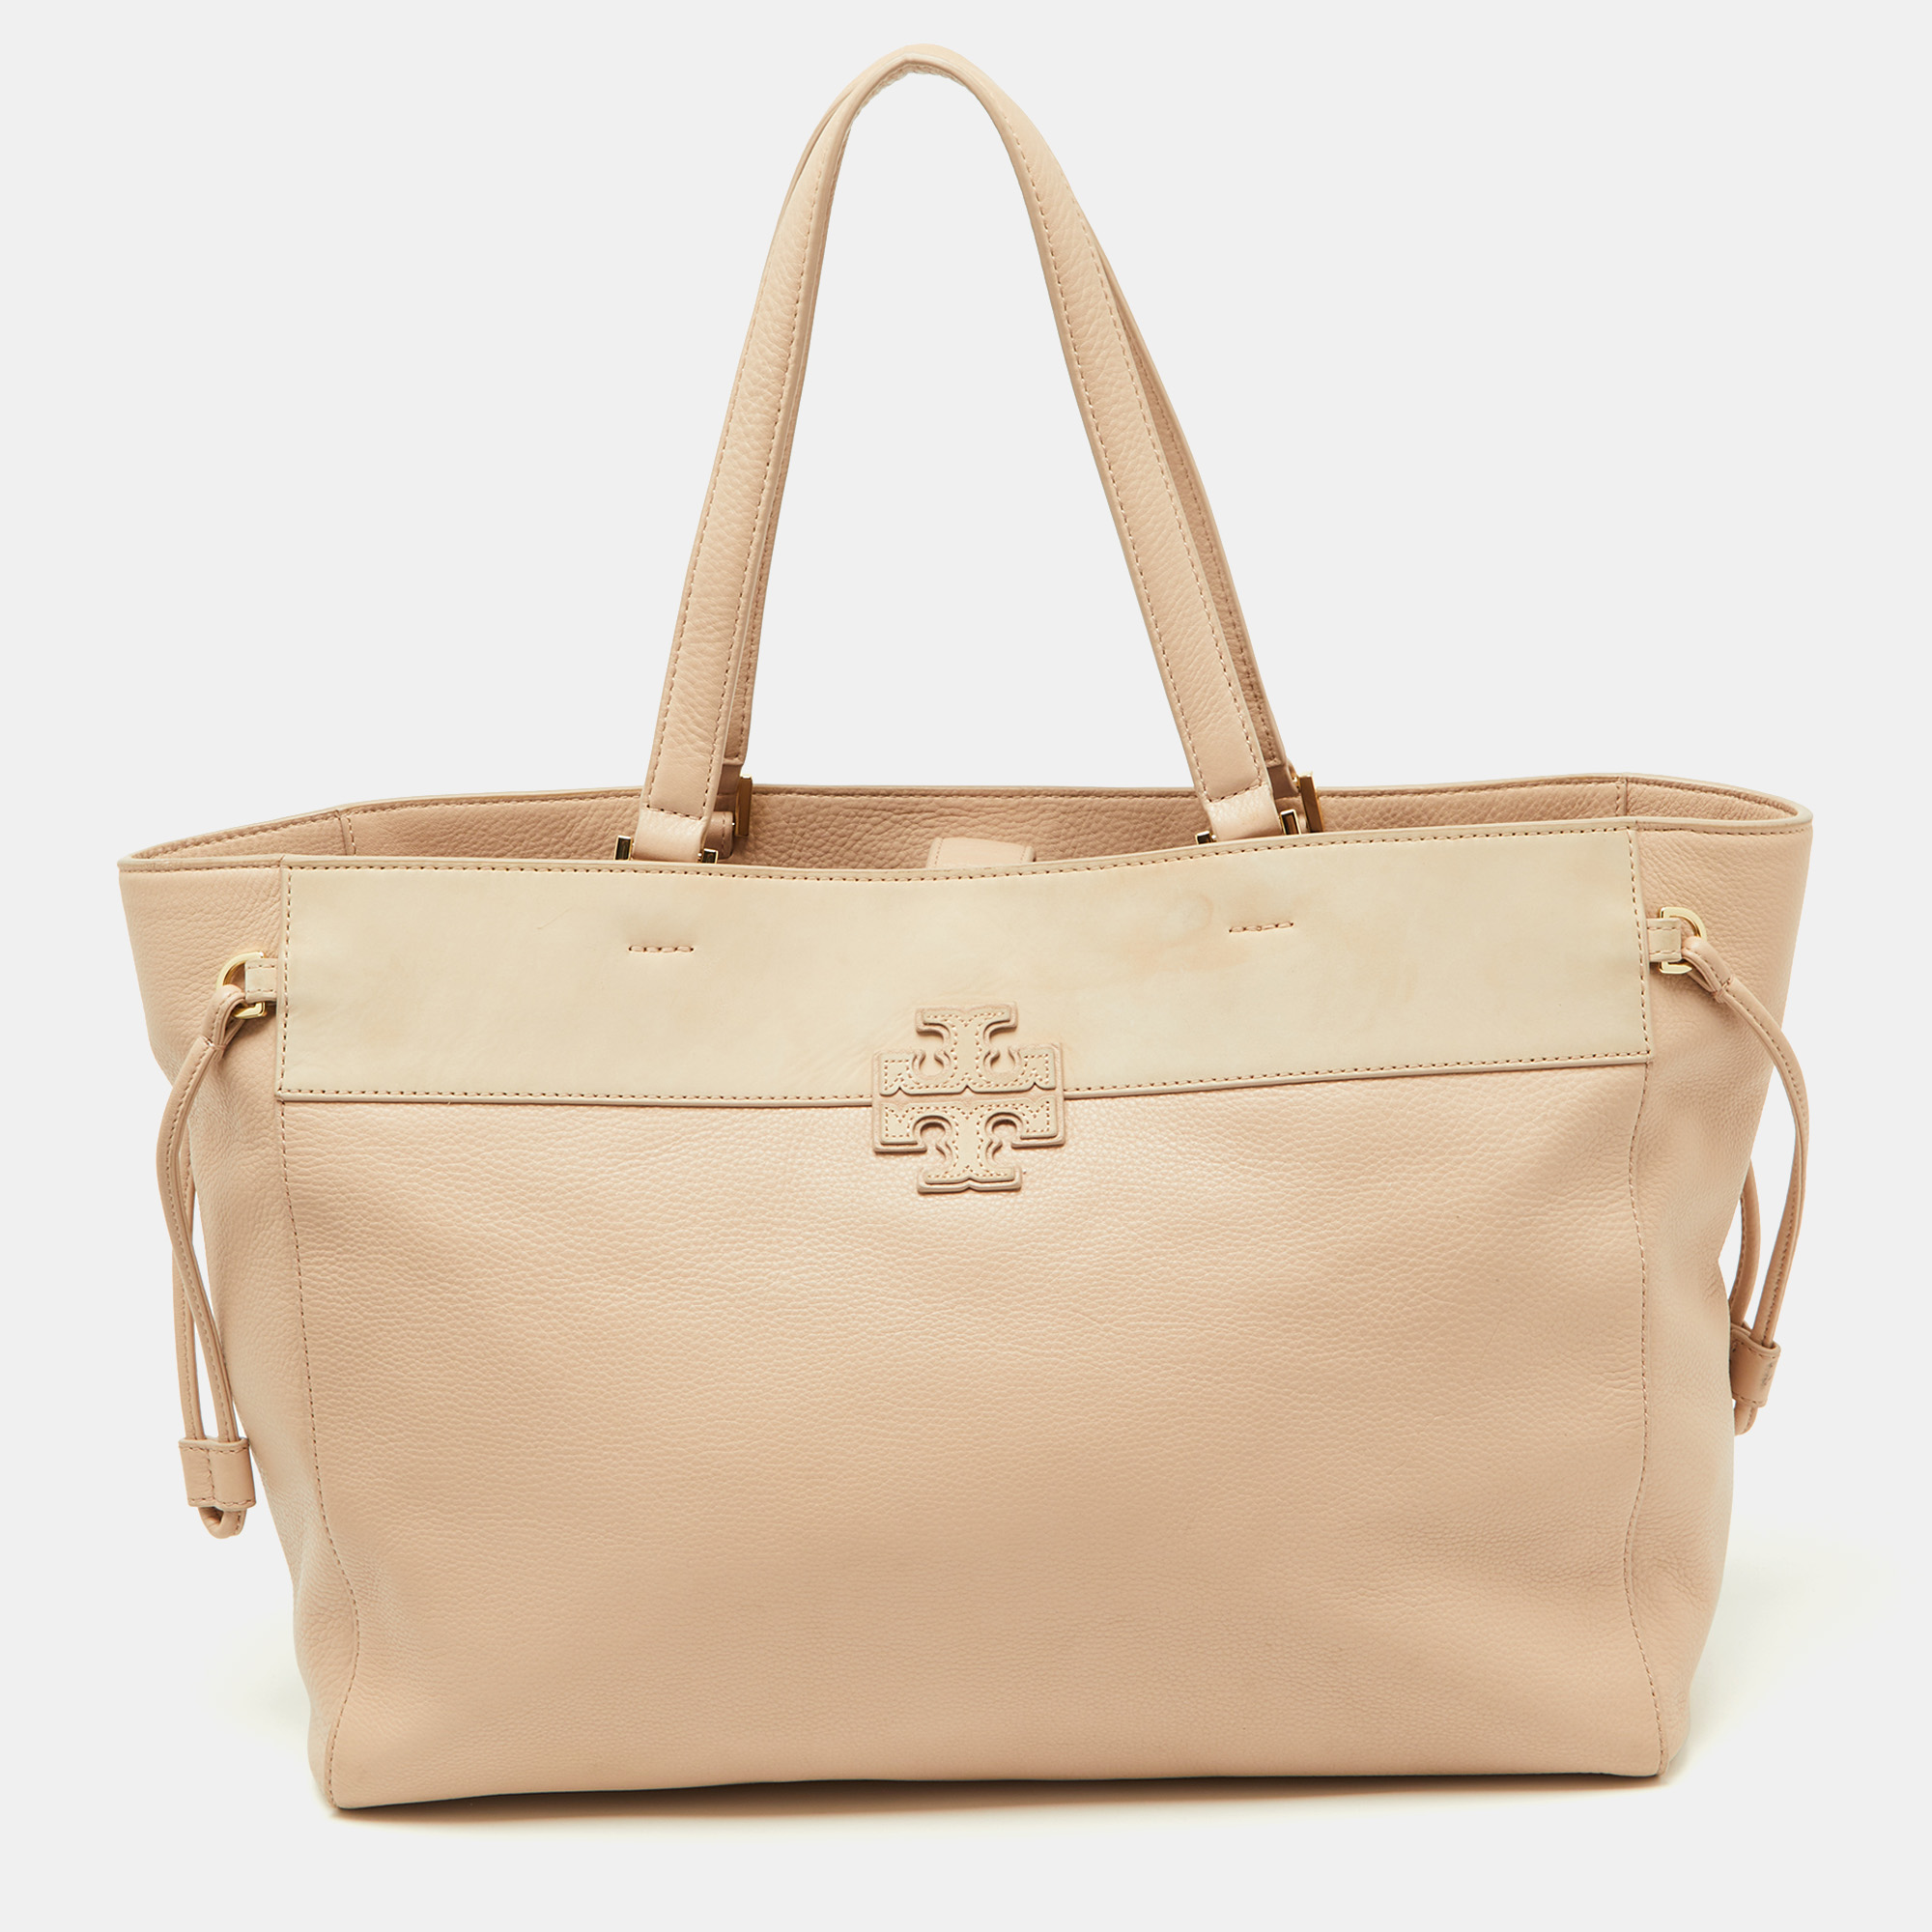 Known for its high standard and fine finish this handbag from Tory Burch will be your companion for years to come. This tote is carefully created from genuine leather and the brand label at the front. An epitome of fashion this beautifully crafted bag comes with a highly durable canvas interior. Add some sophistication to your ensemble with this high class handbag in pink and beige.